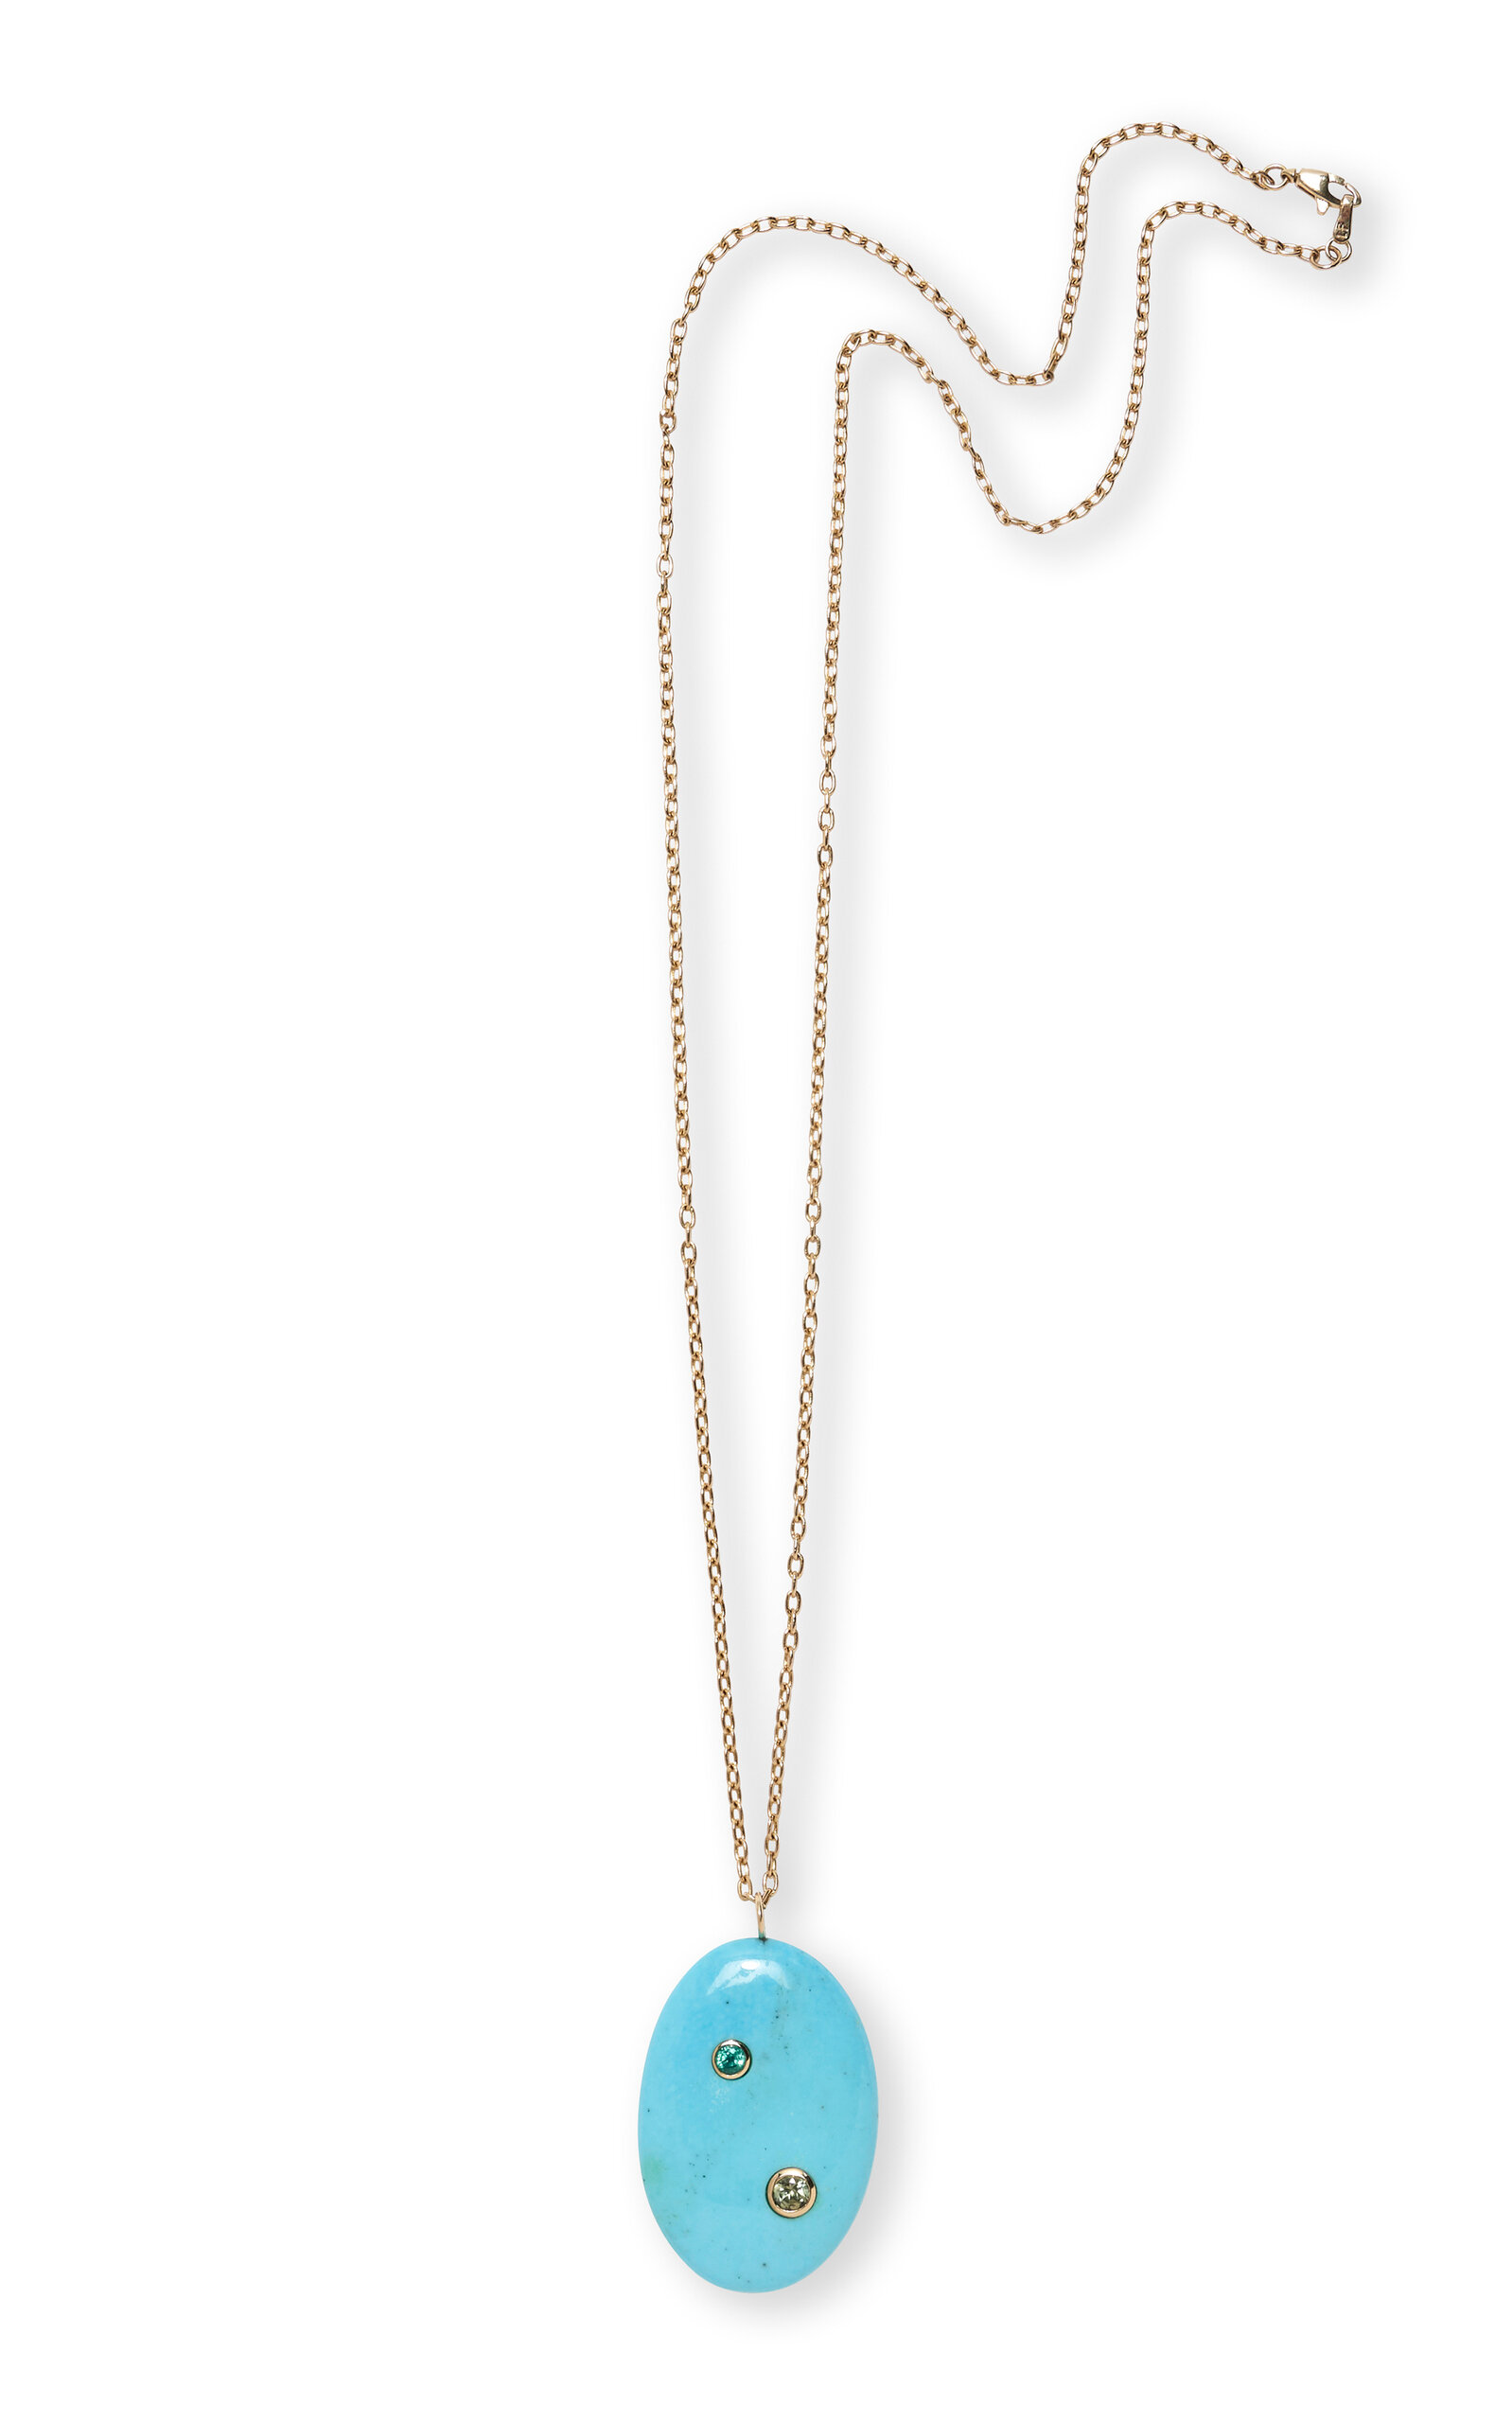 Exclusive Sleeping Beauty Turquoise and 14k Gold Pendant Necklace